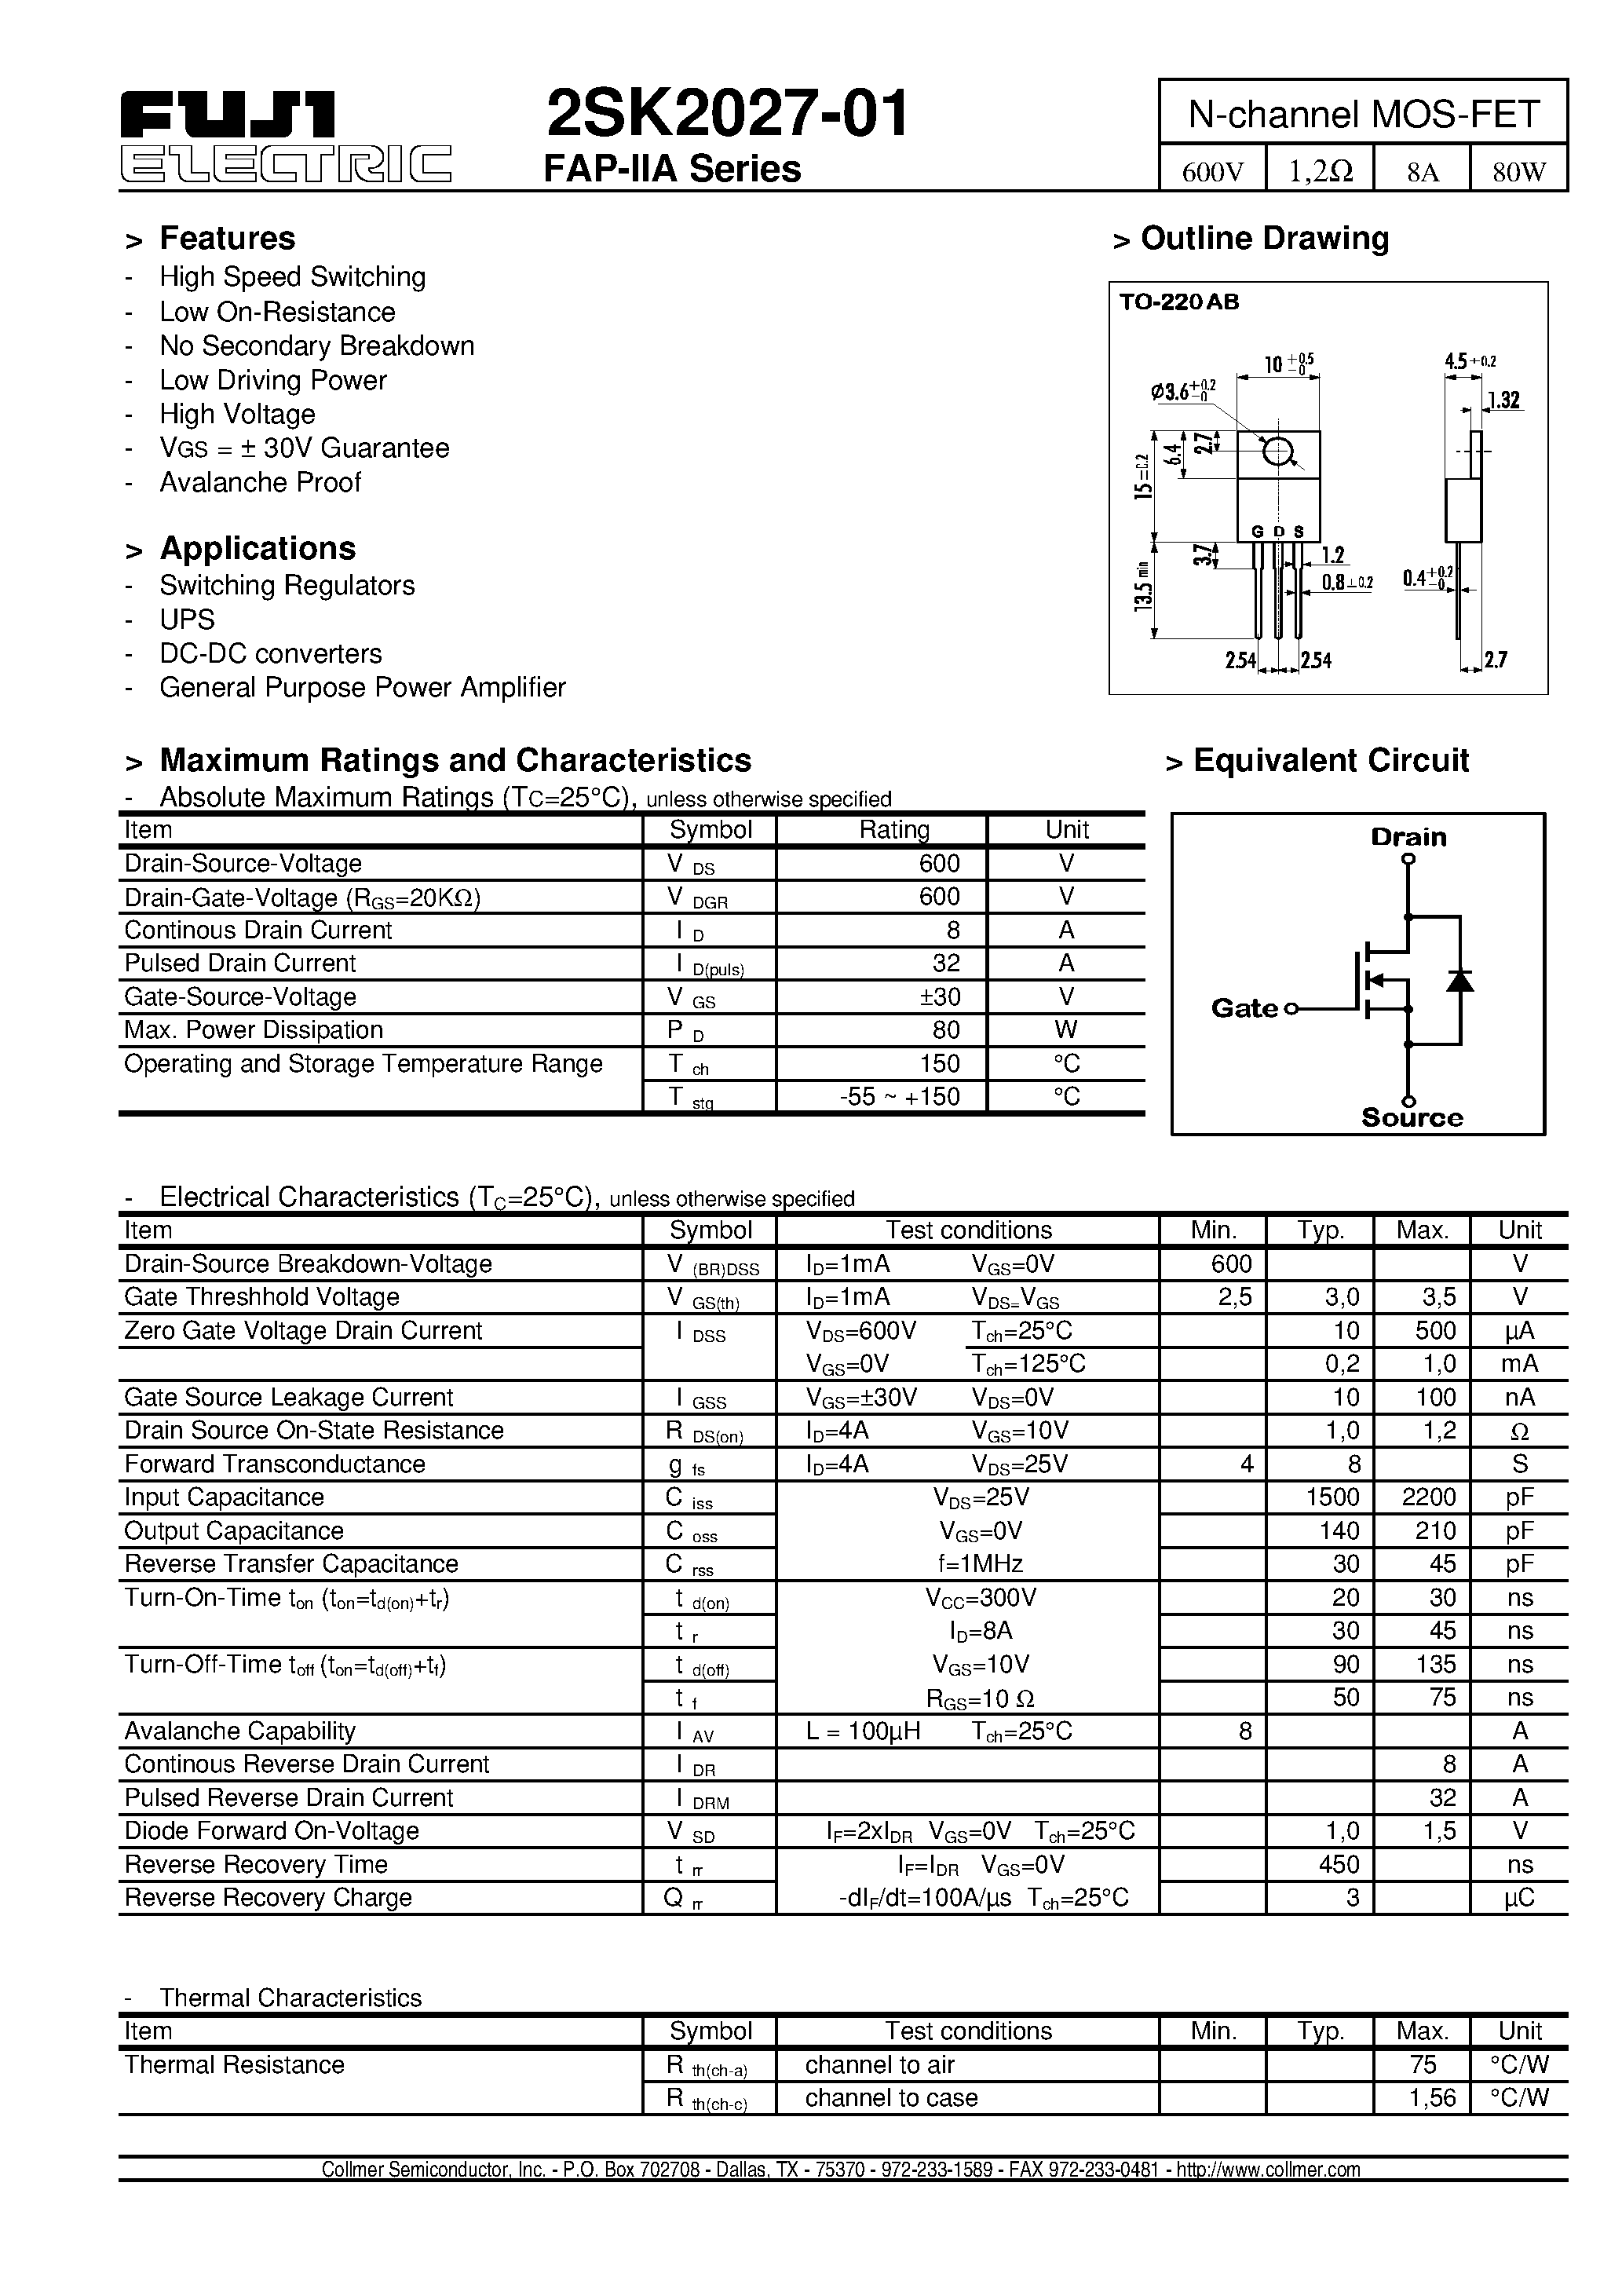 Datasheet 2SK2027-01 - N-channel MOS-FET page 1